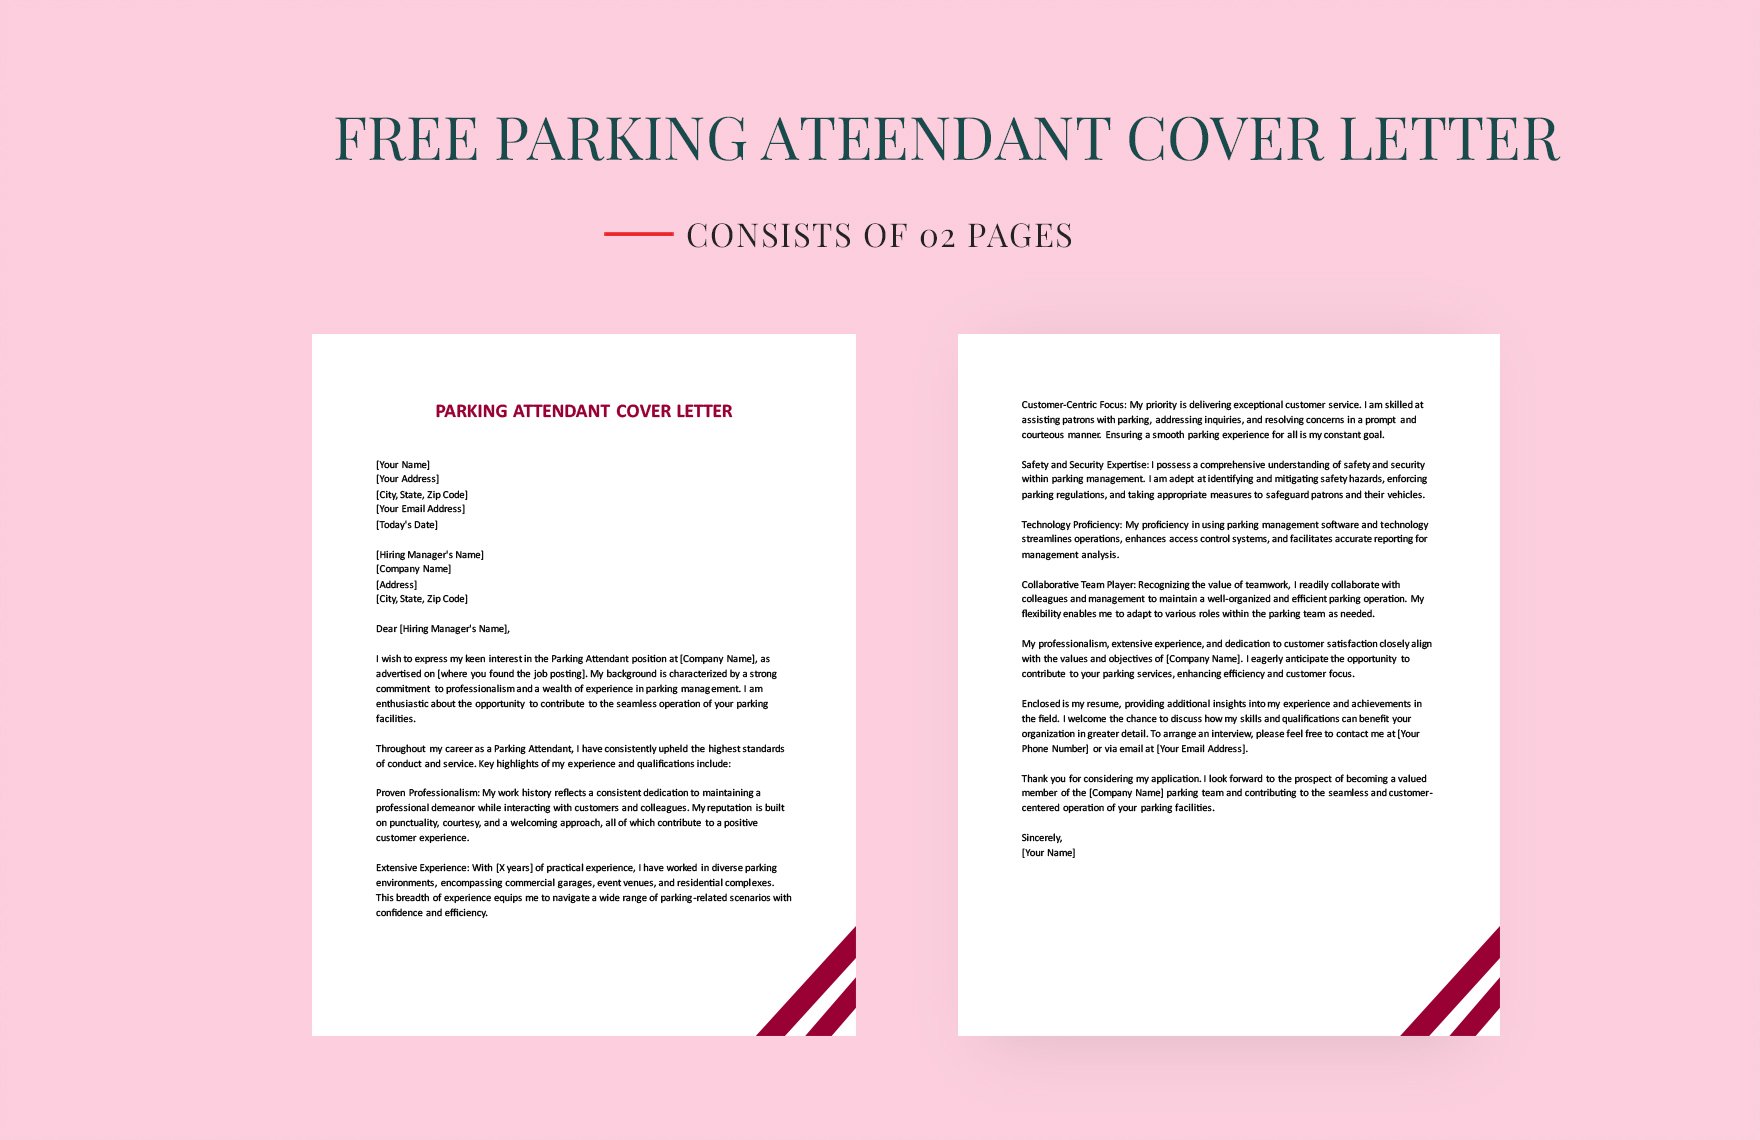 Parking Attendant Cover Letter in Word, Google Docs, PDF